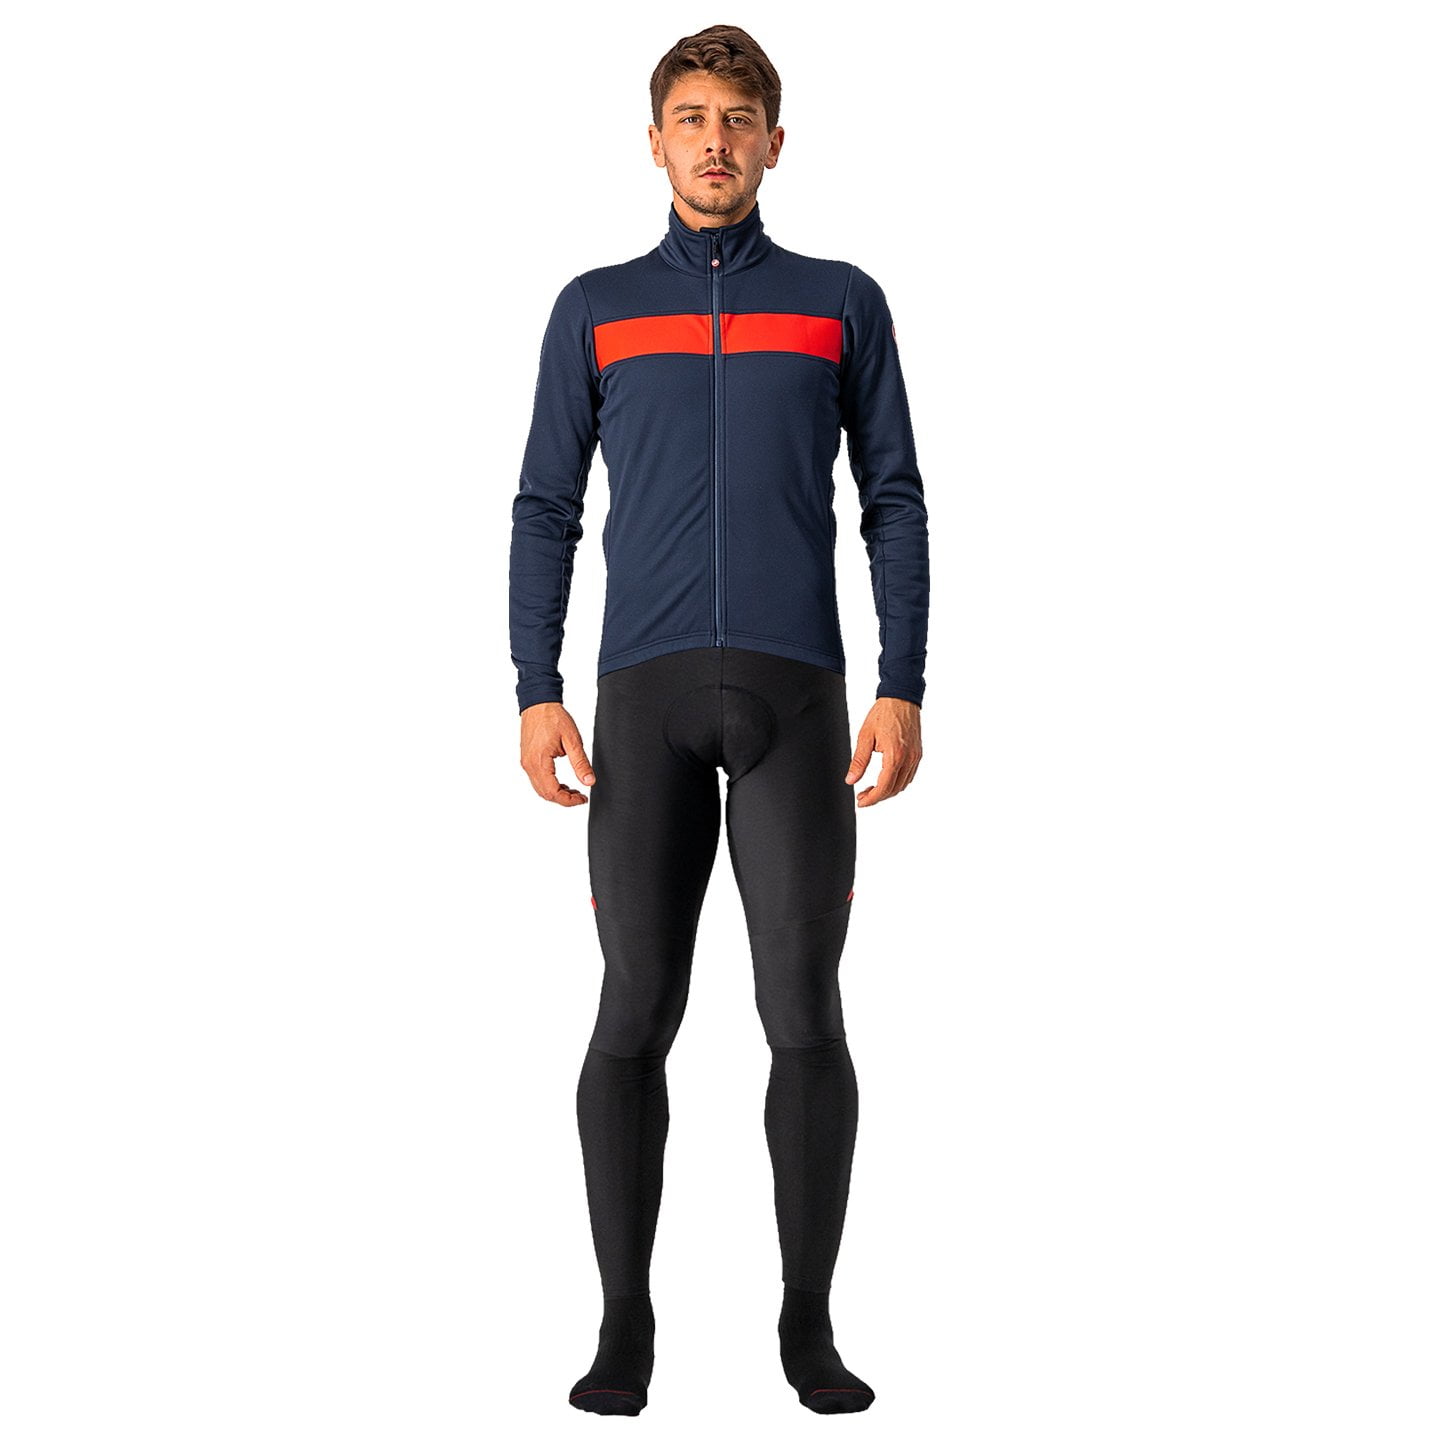 CASTELLI Raddoppia 3 Set (winter jacket + cycling tights) Set (2 pieces), for men